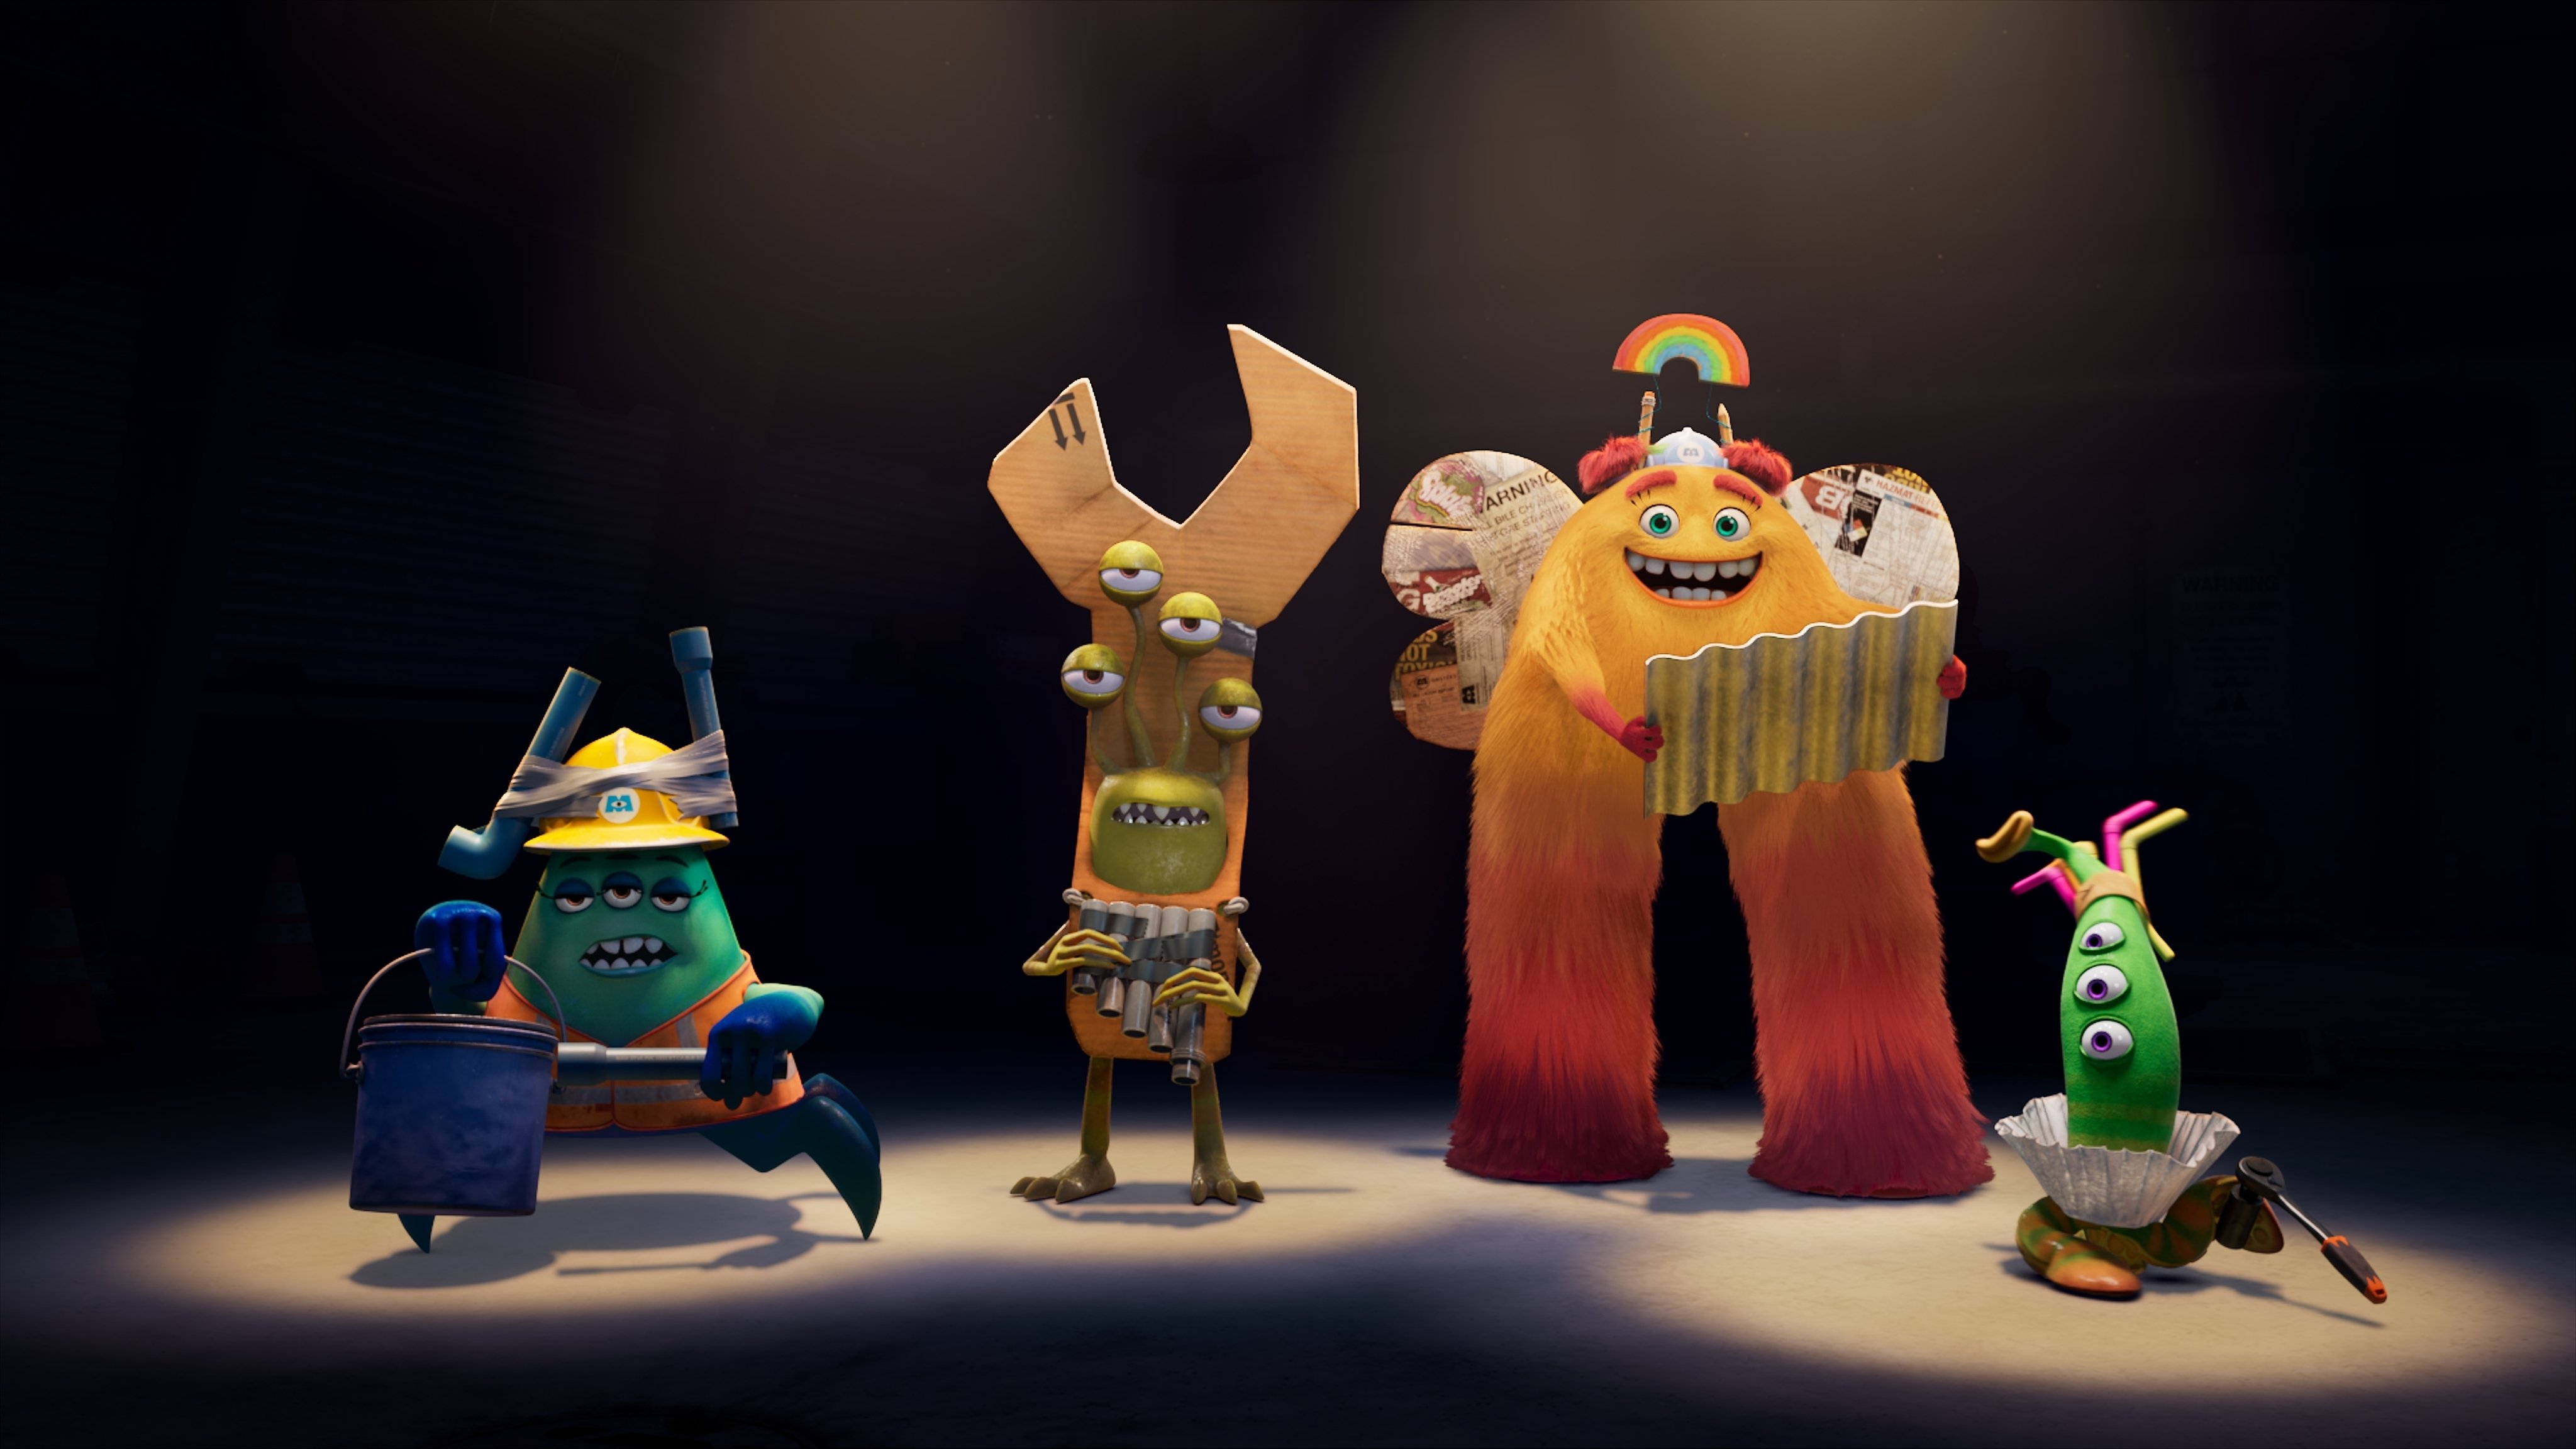 The MIFT characters from the Disney+ original series, 'Monsters at Work'